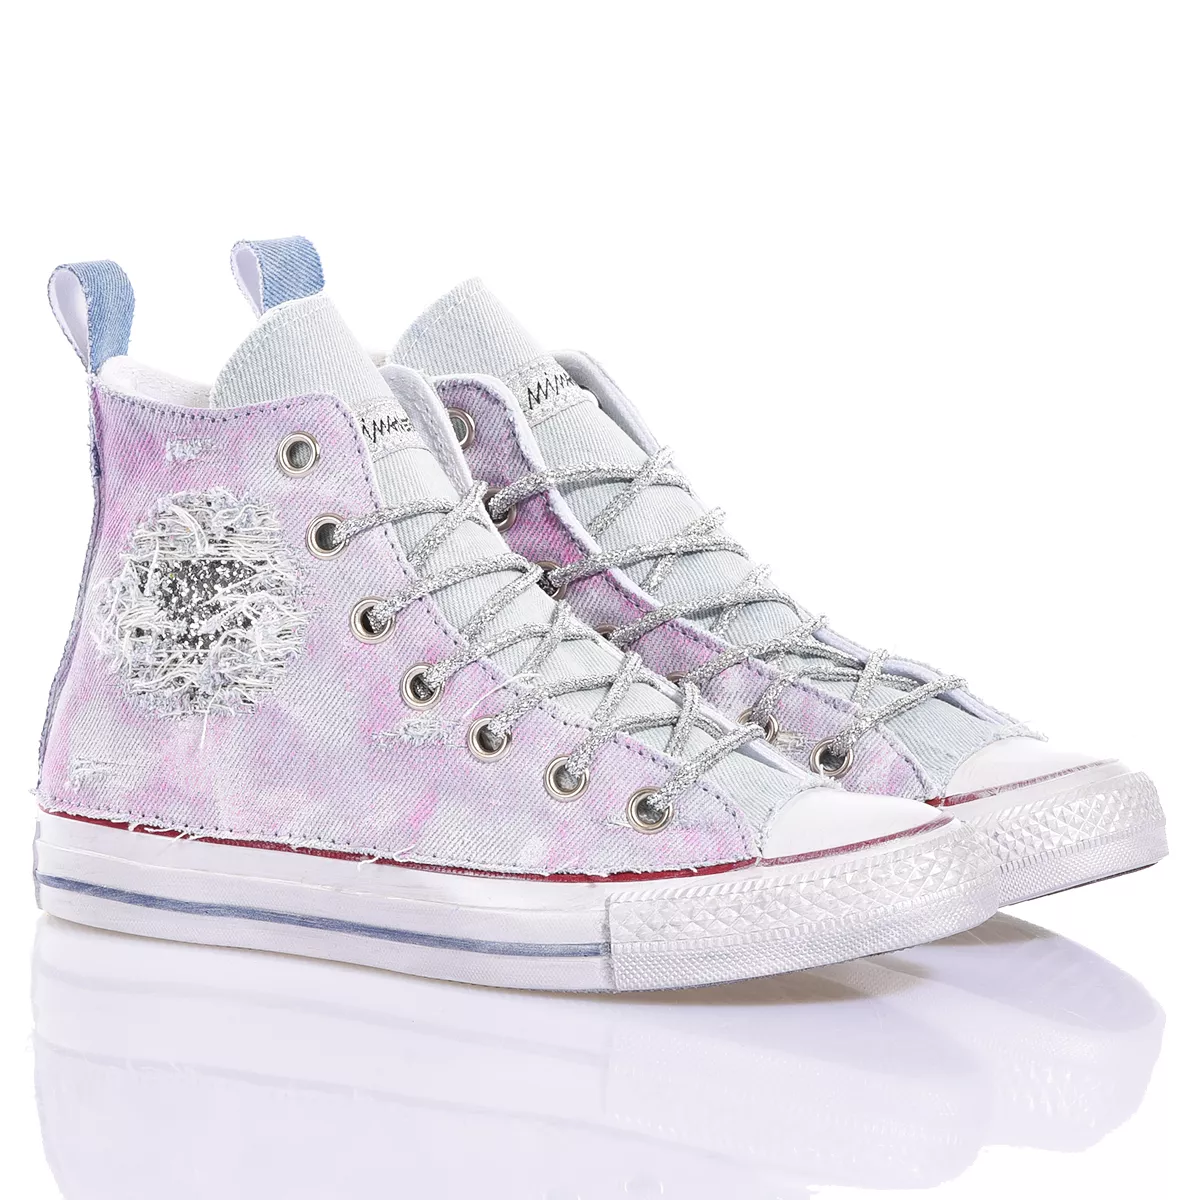 Converse Denim Glitter Chuck Taylor High Top Washed-out, Glitter, Special